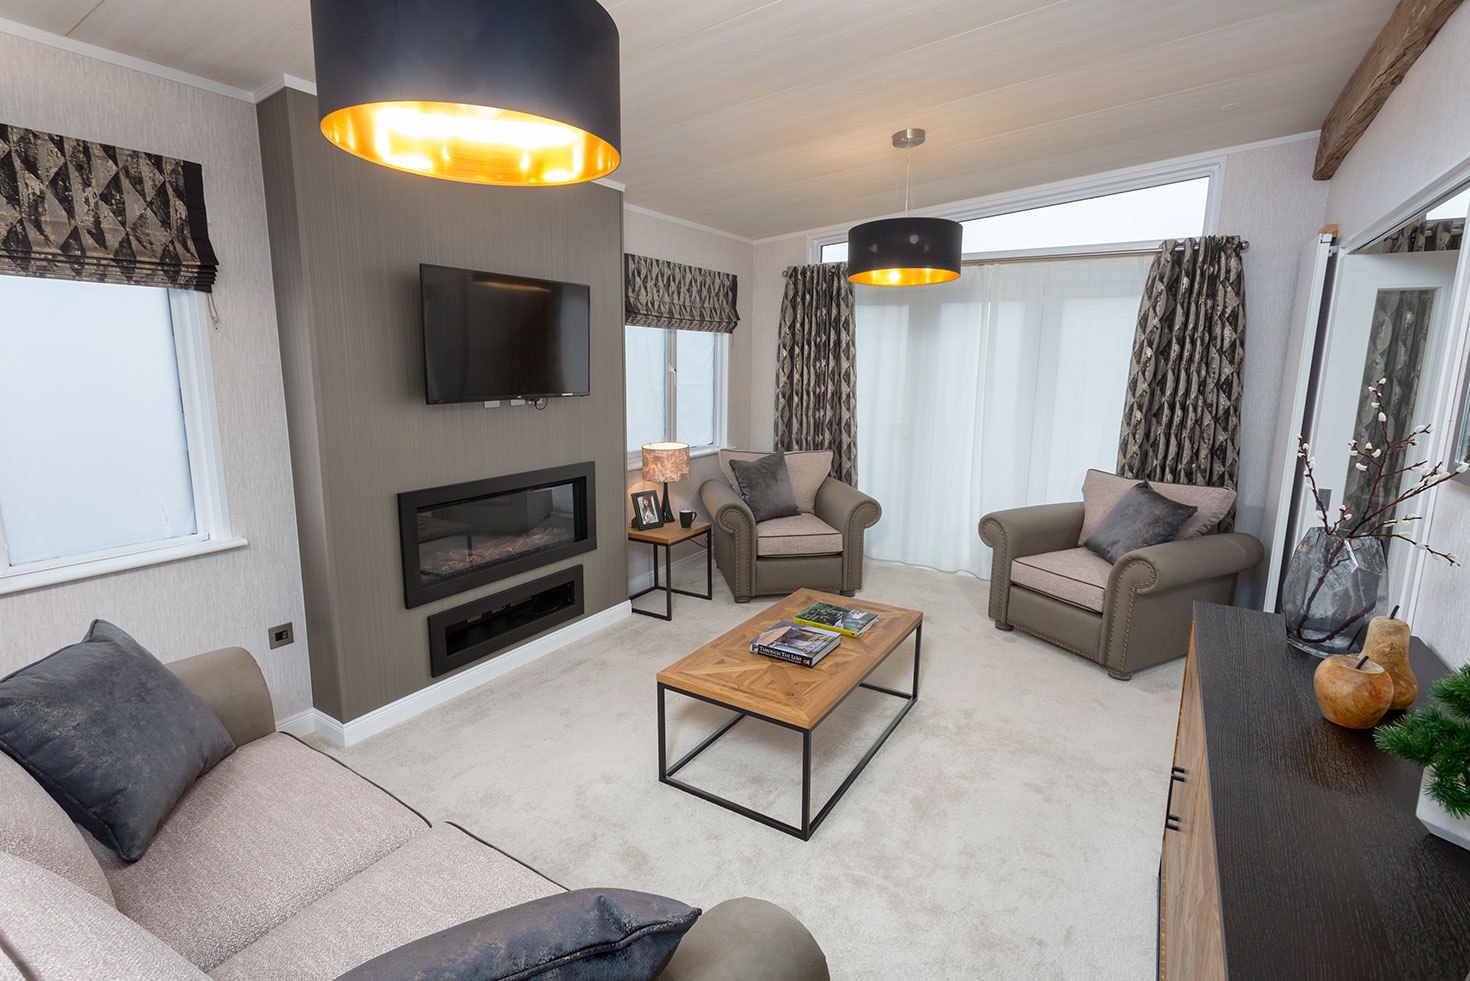 Pemberton Rivendale Twin Unit Timber Lodge 2022, brand new timber holiday lodge for sale Lake District